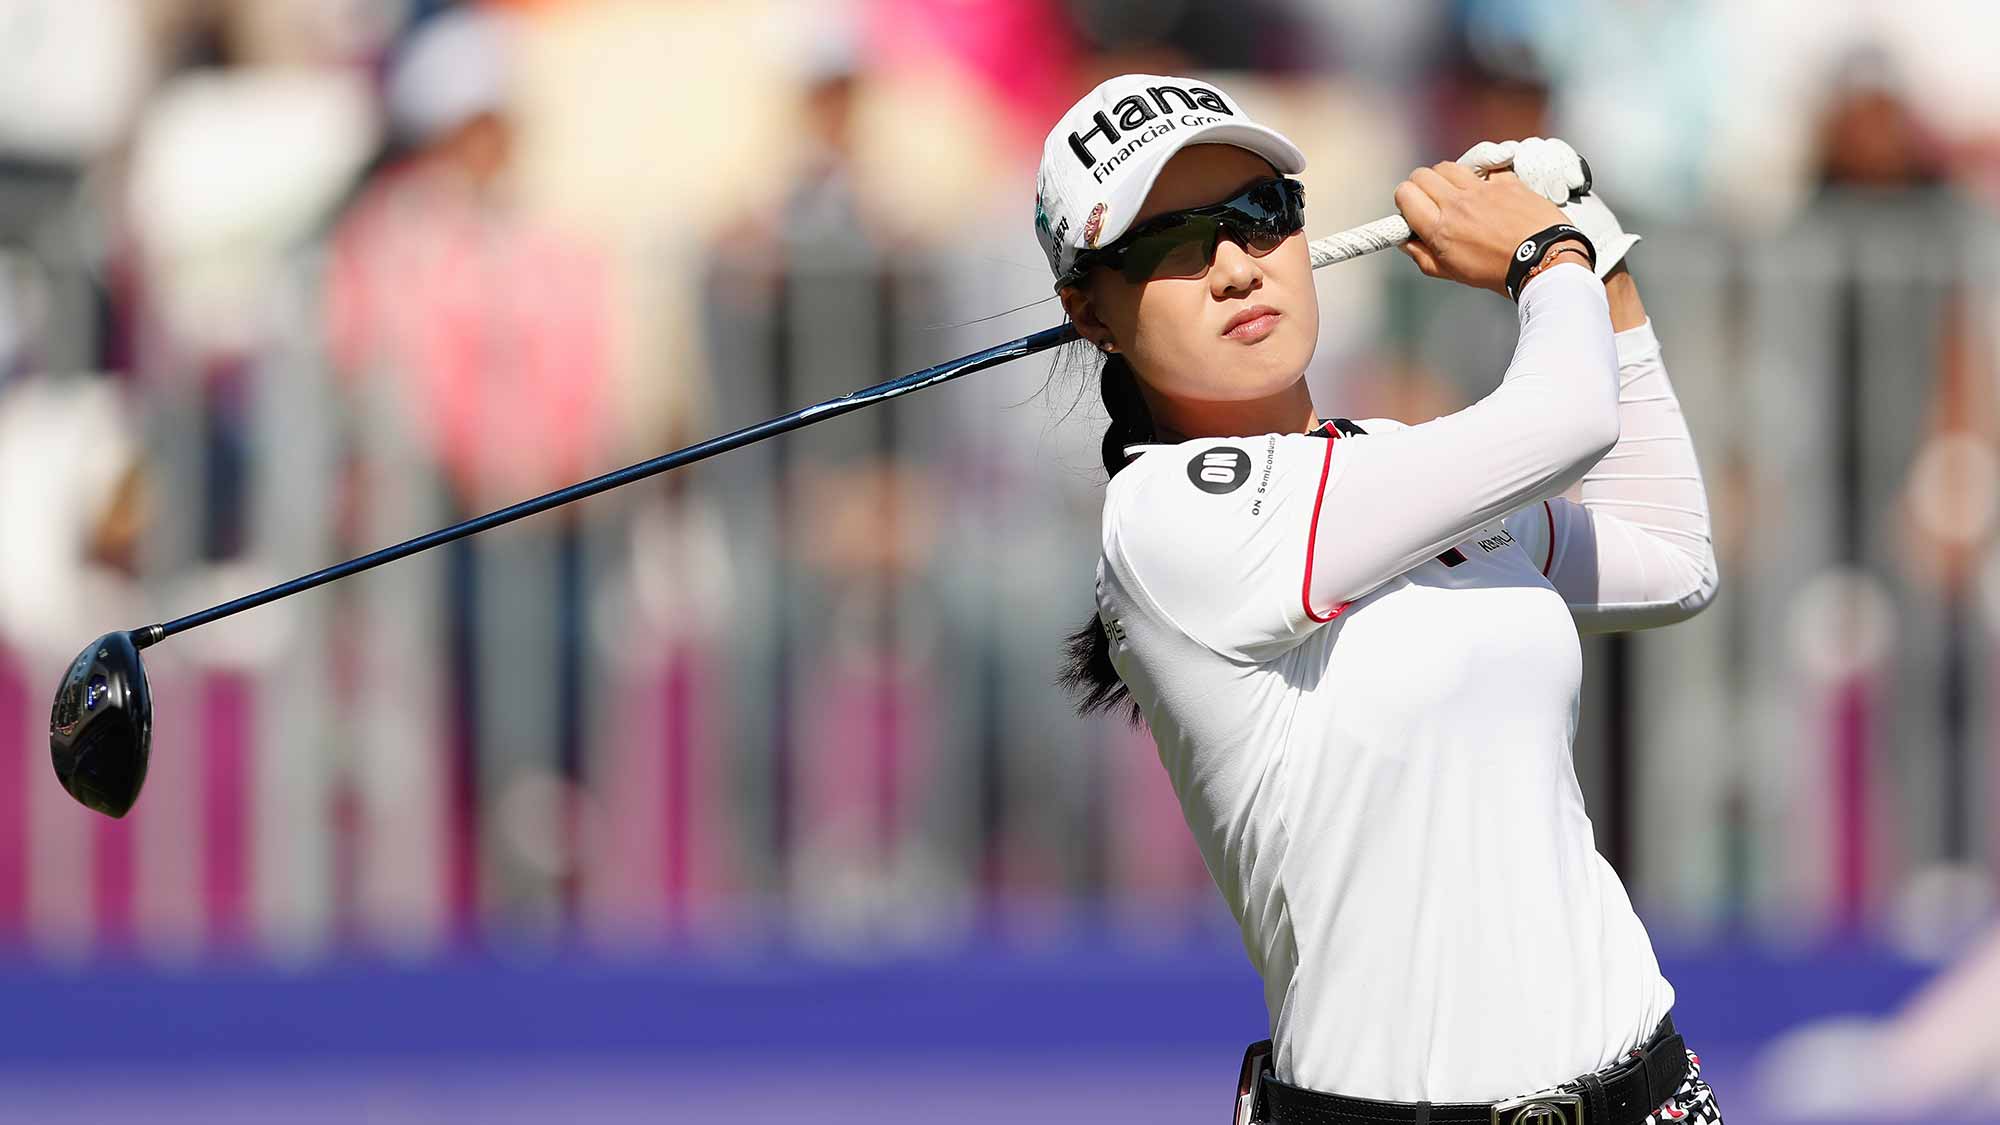 Minjee Lee of Australia tees off at the first hole during the final round of the Swinging Skirts LPGA Taiwan Championship at Ta Shee Golf & Country Club on October 28, 2018 in Taoyuan, Chinese Taipei